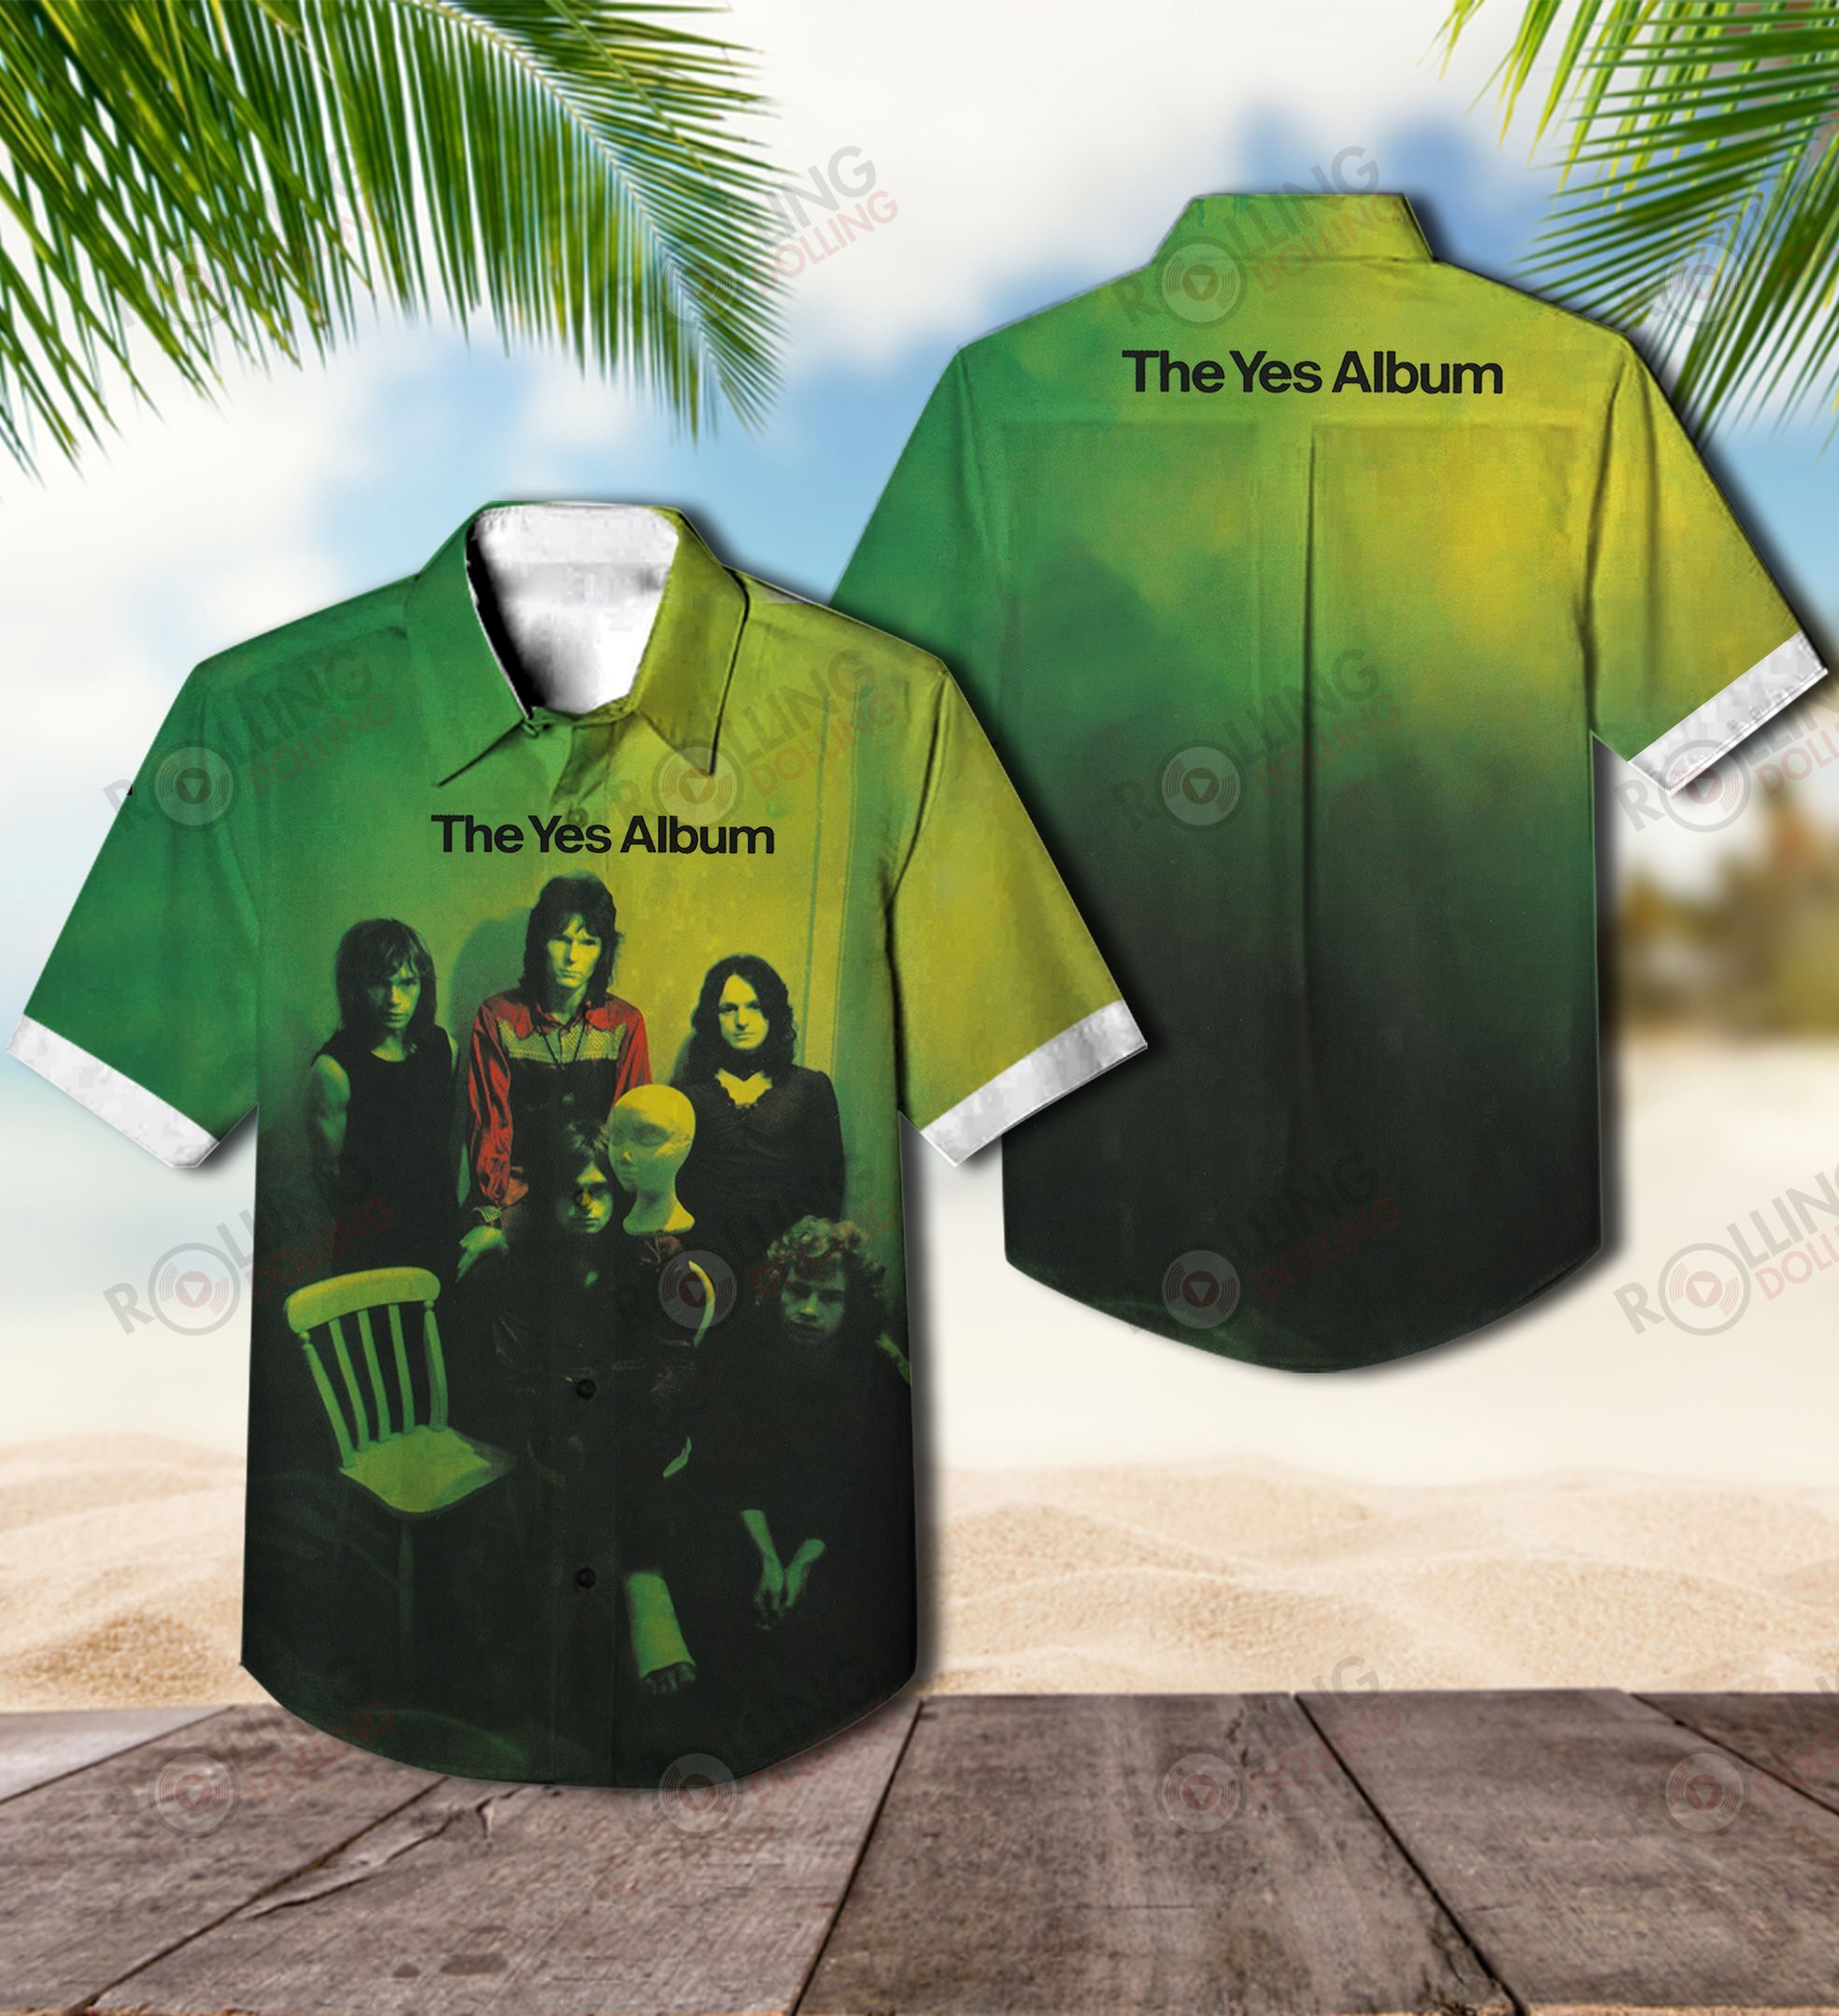 The Hawaiian Shirt is a popular shirt that is worn by Rock band fans 62